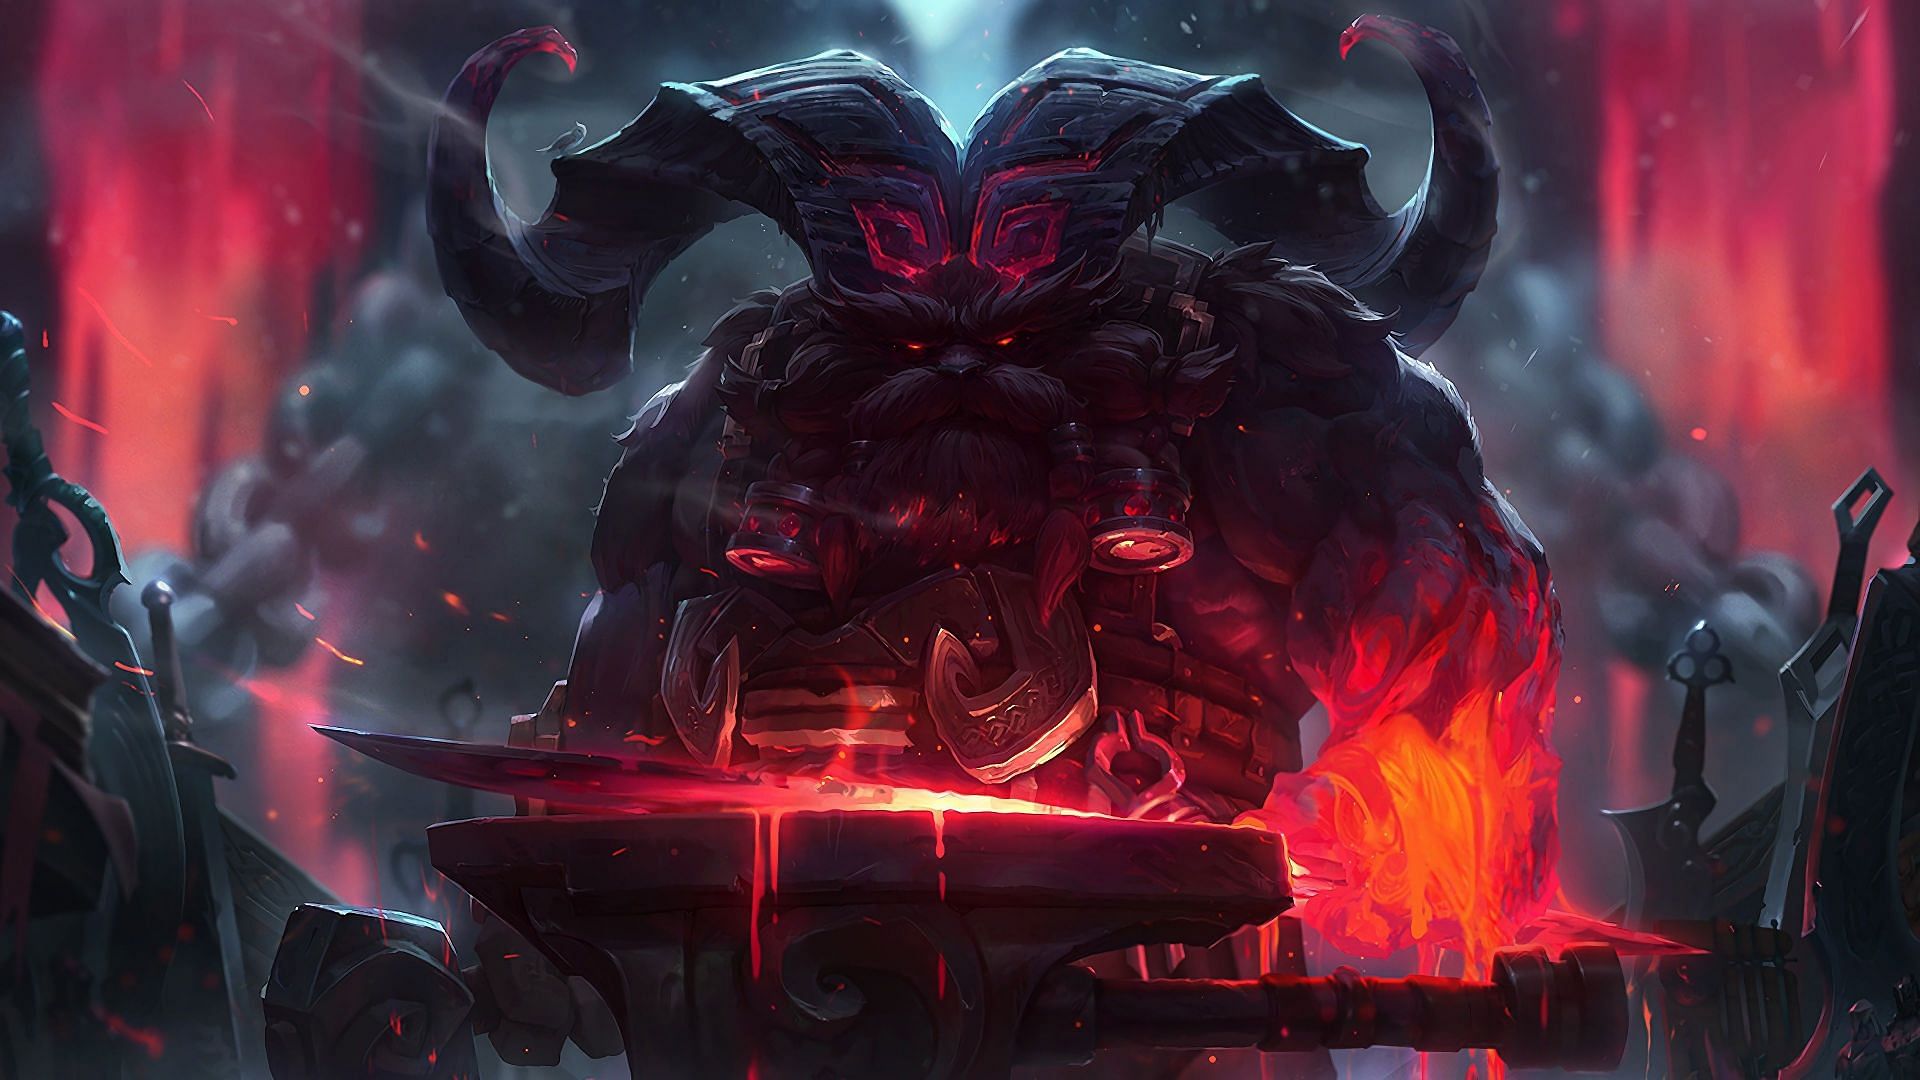 Ornn, the Fire below the Mountain (Image via Riot Games)